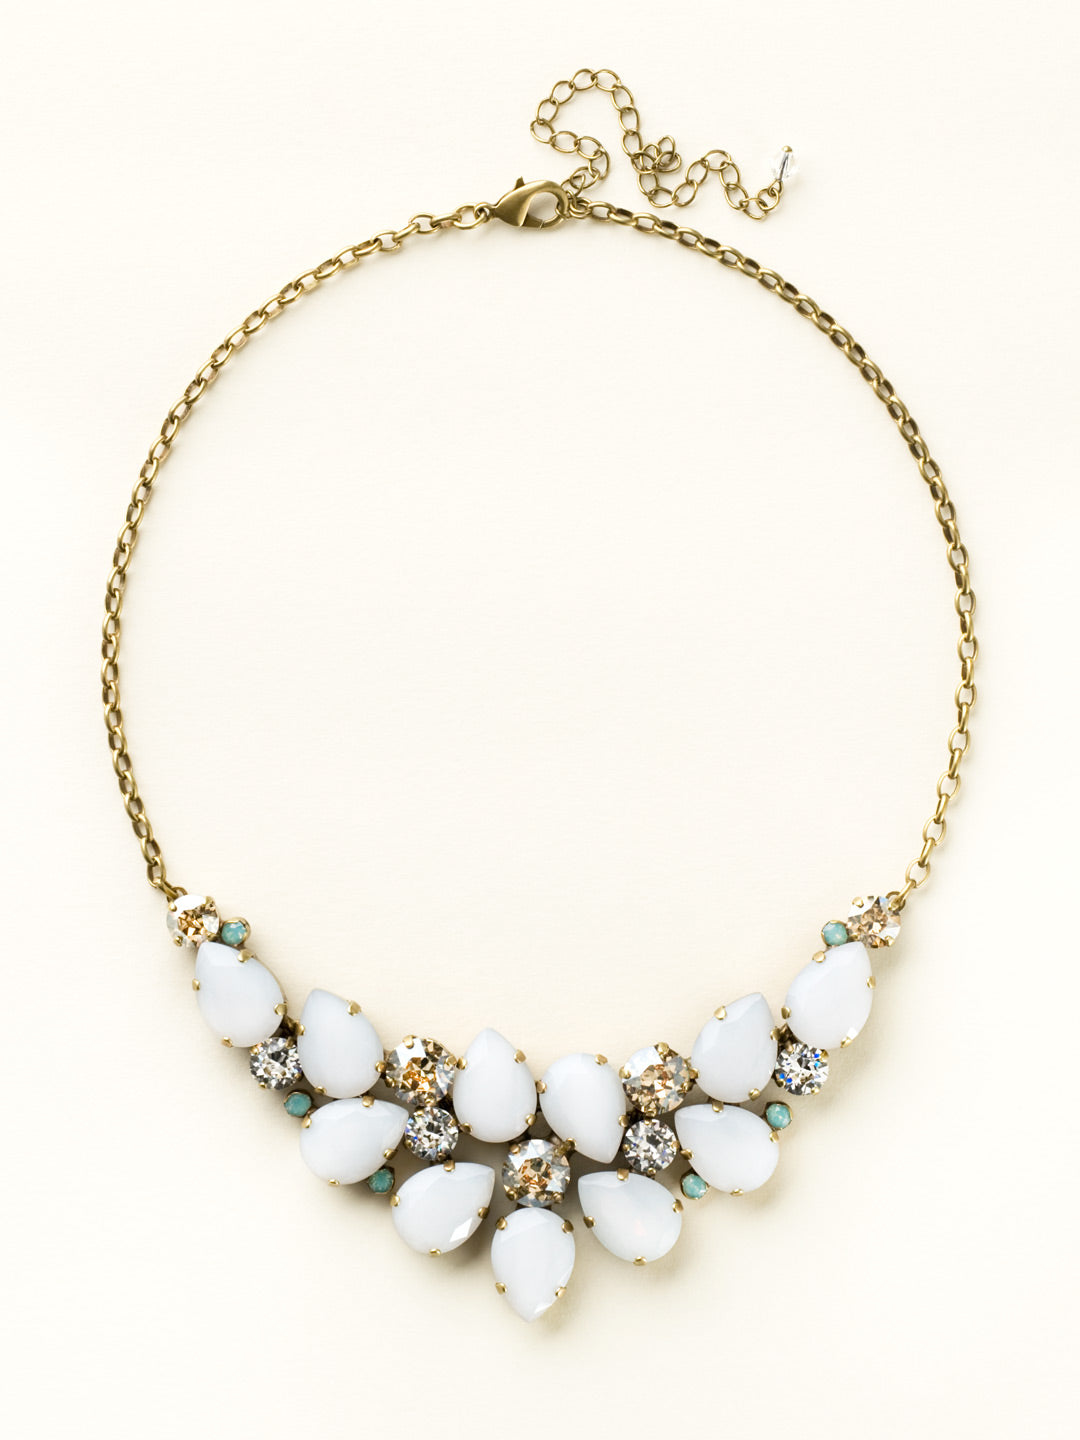 Dare To Pear Crystal Statement Necklace - NCP3AGRIV - Feel your confidence boost when you place this bib necklace onto your collar. A gorgeous cluster of sparkling teardrop crystals make a bold statement, but you'll be the one who's shining bright!